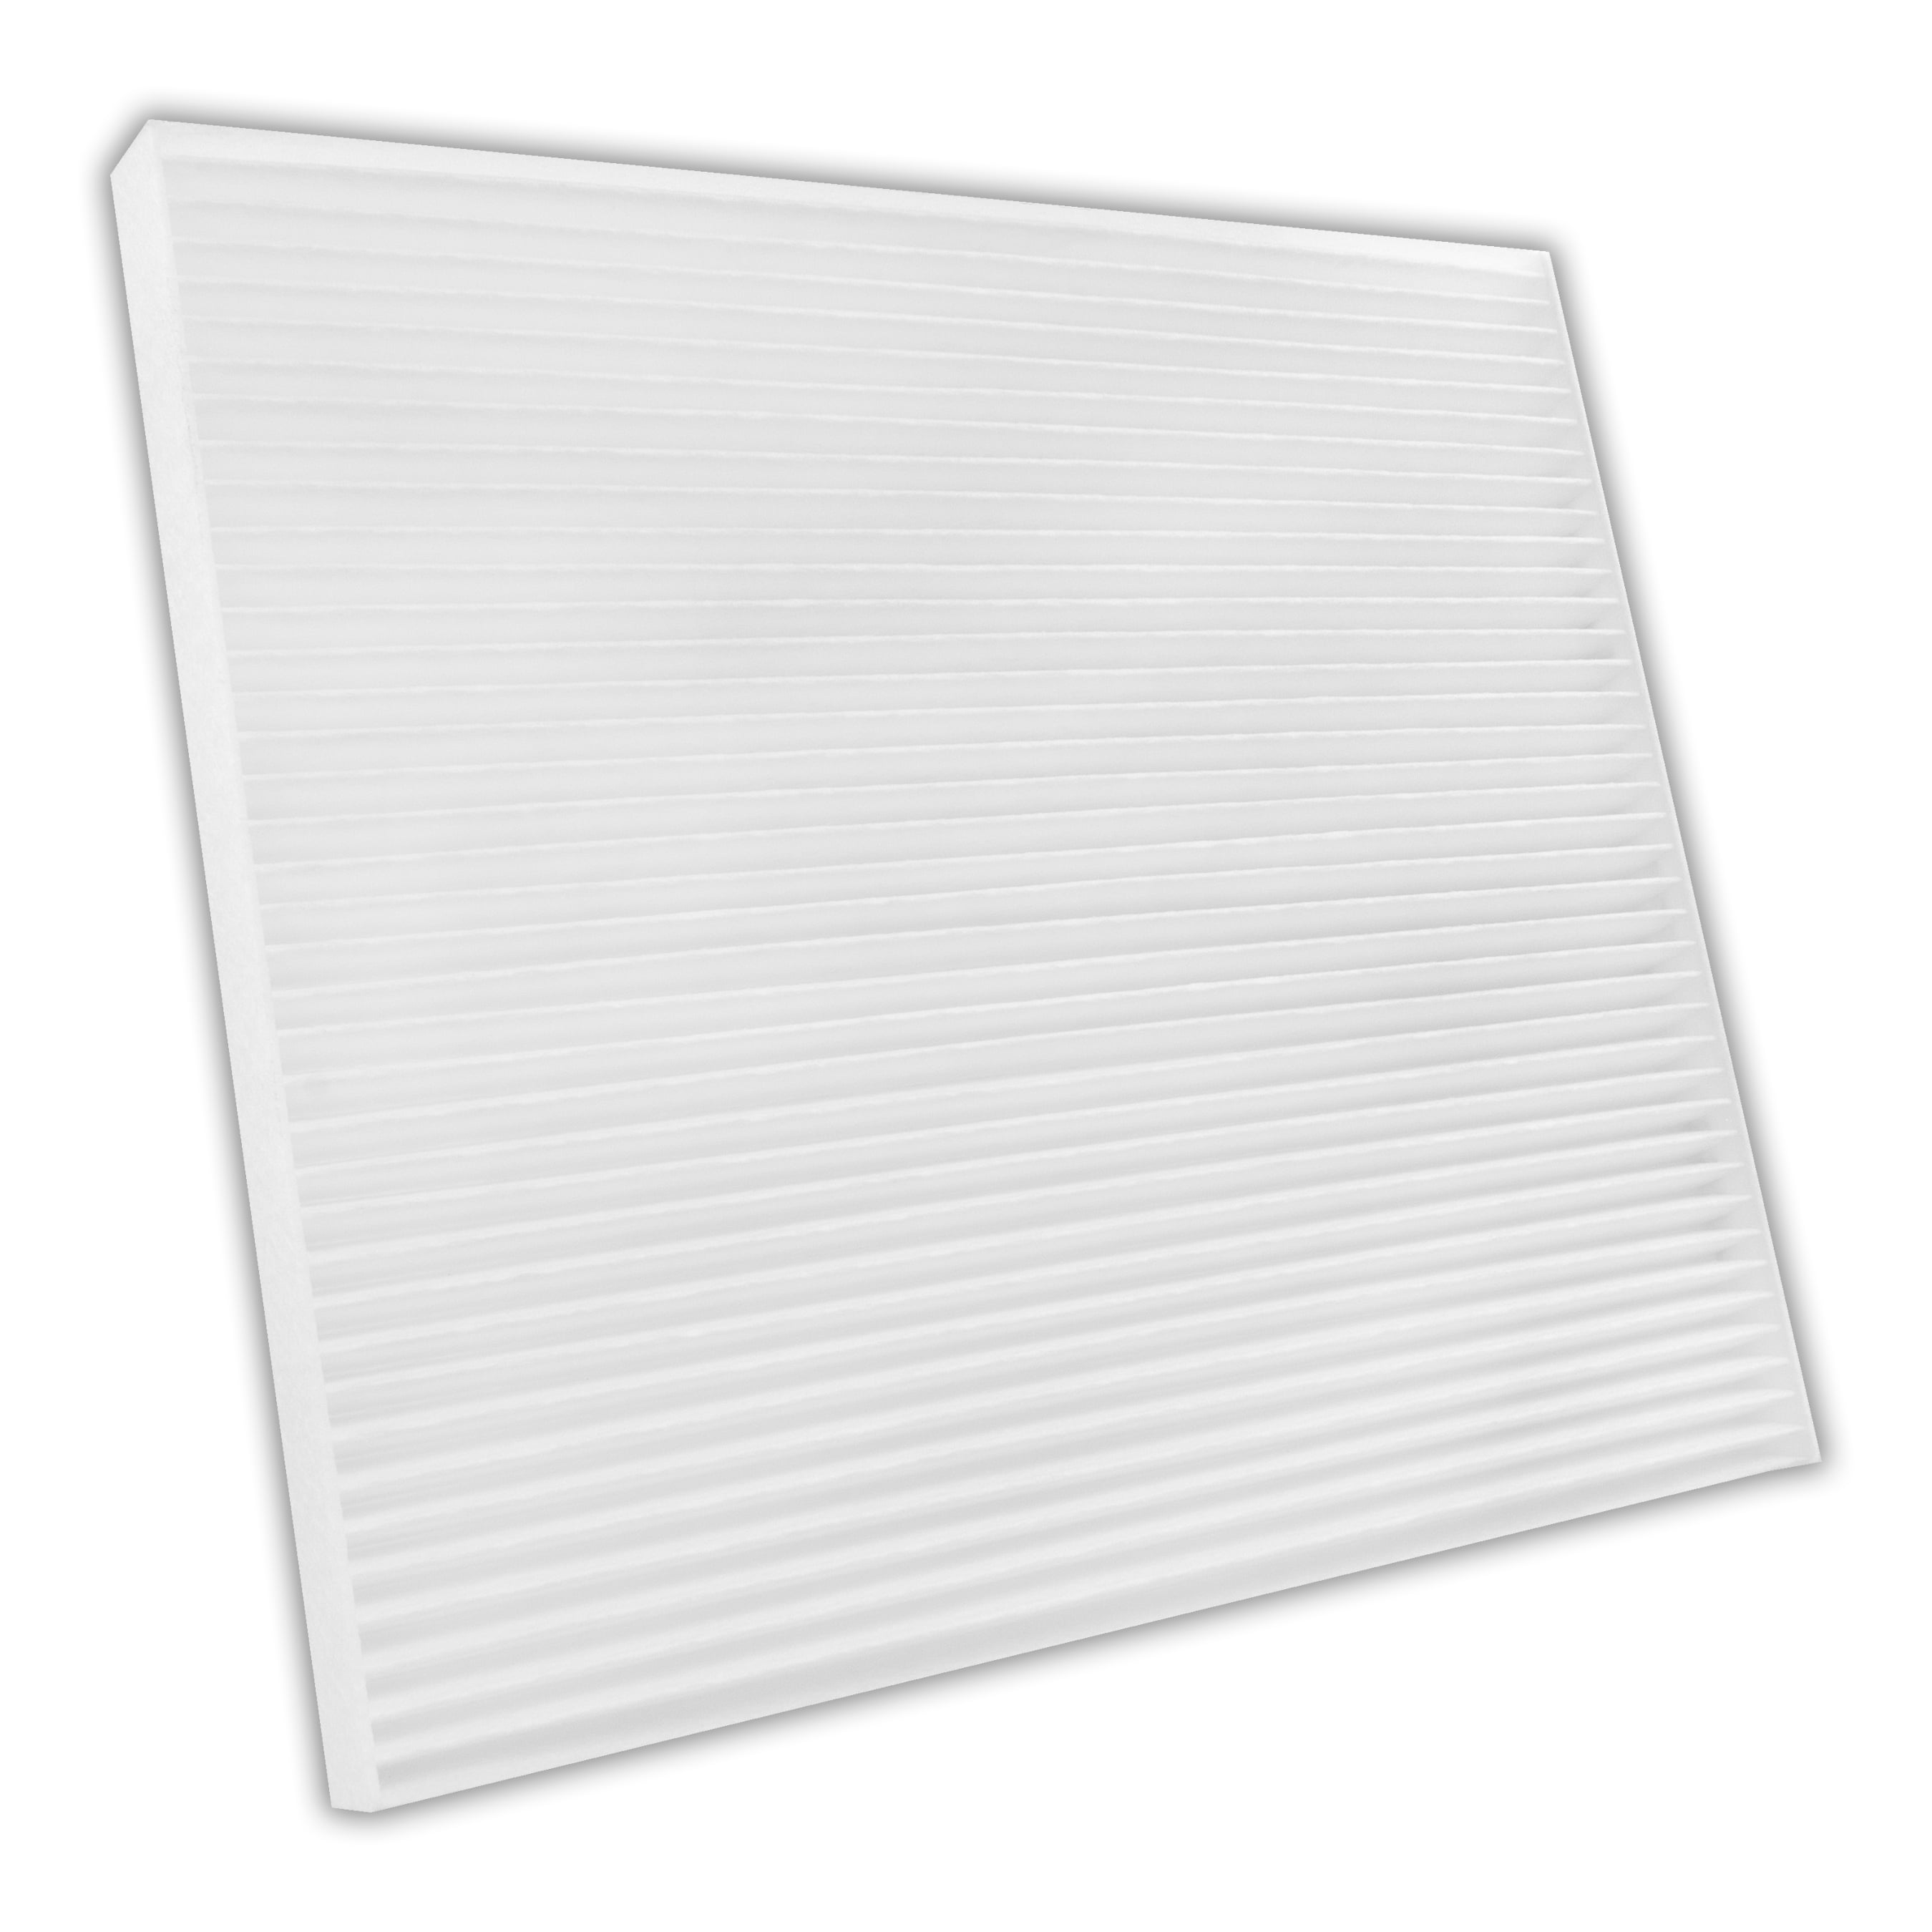 AirQualitee Cabin Air Filter AQ1228, for Select Infiniti and